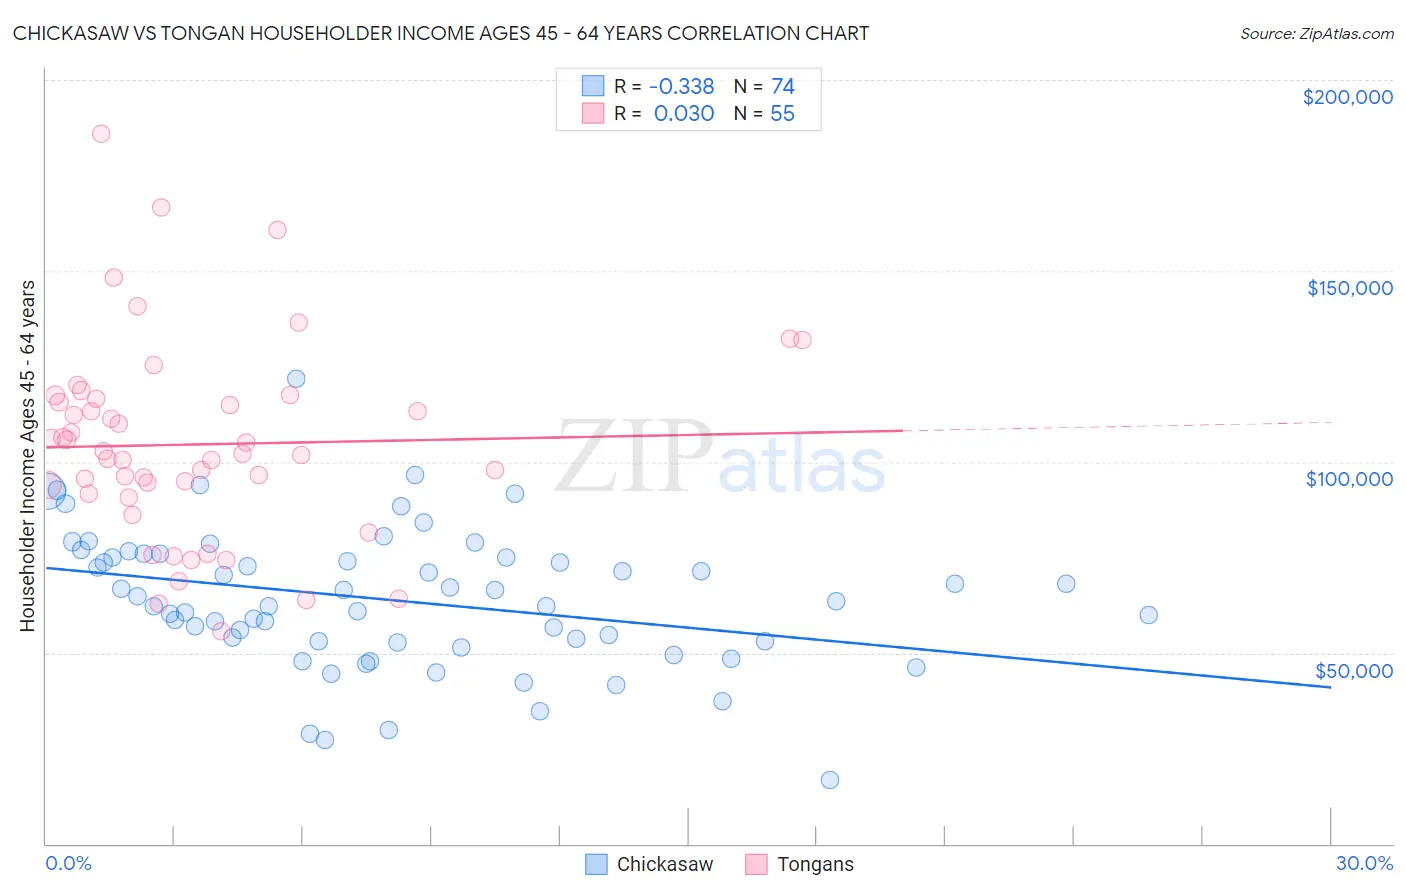 Chickasaw vs Tongan Householder Income Ages 45 - 64 years